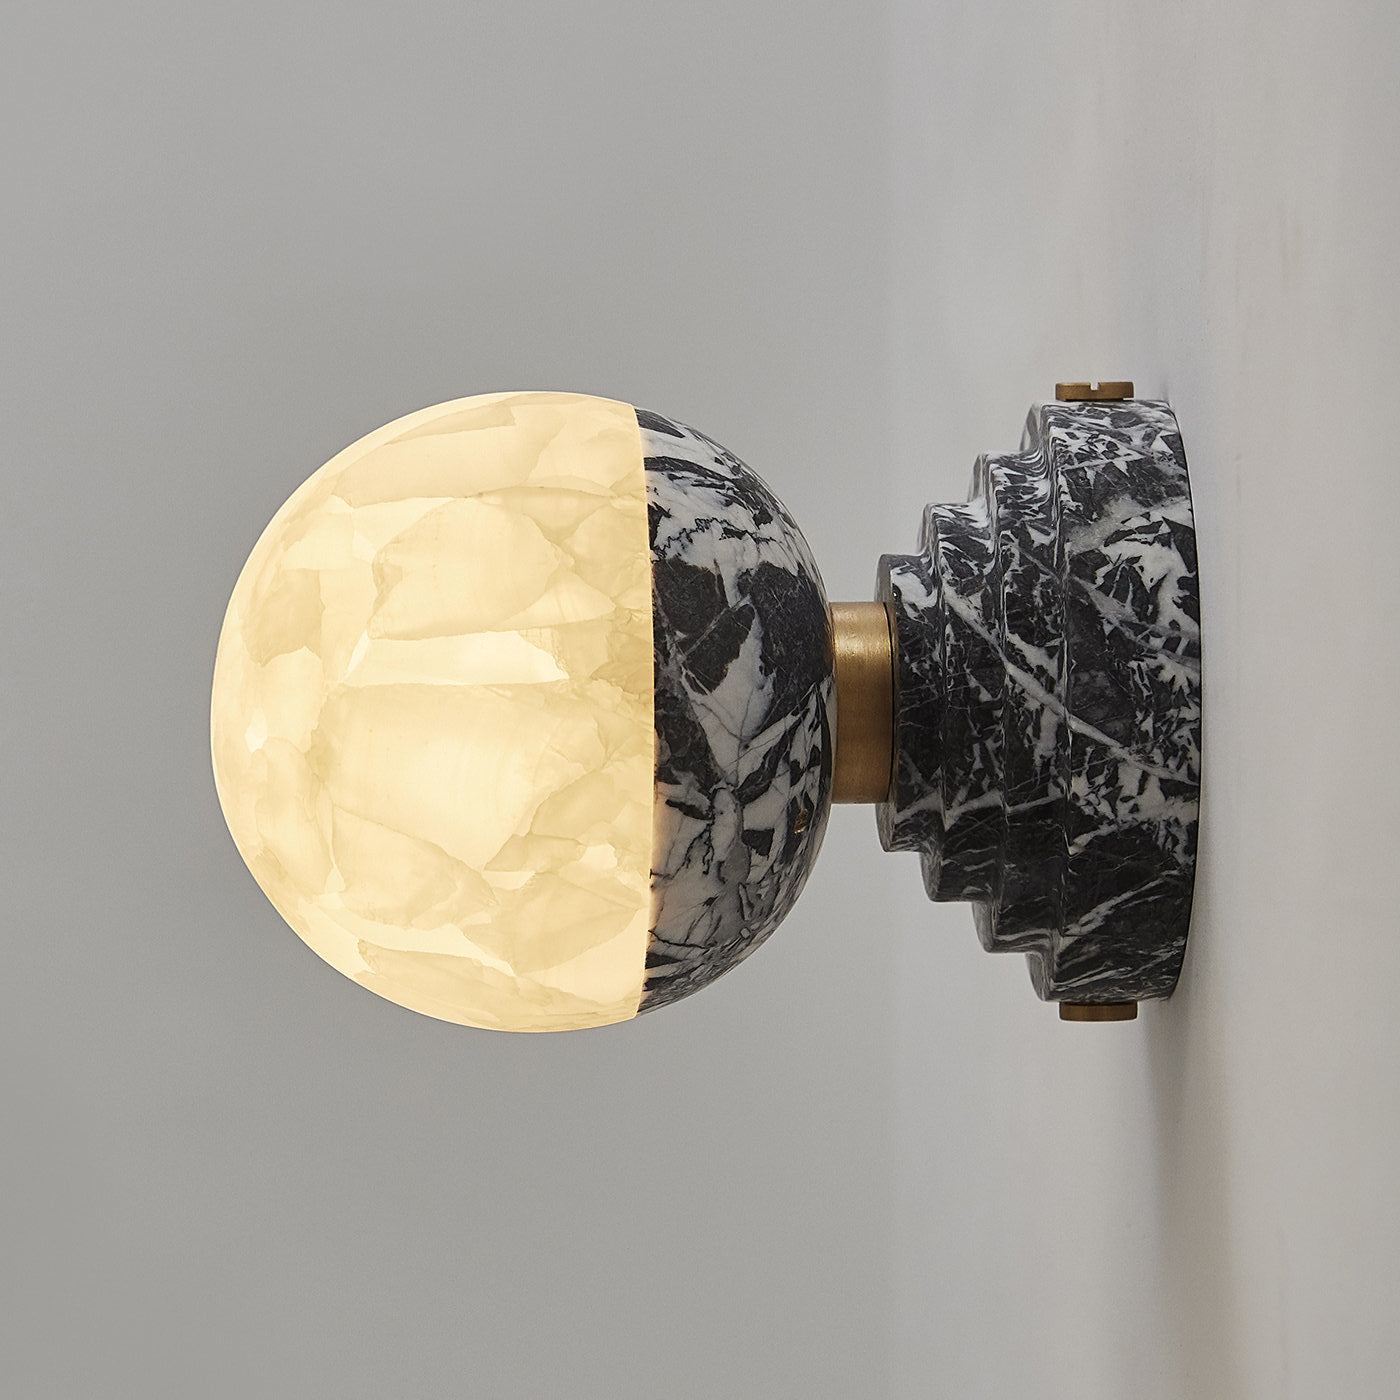 Lunar Sconce in Grand Antique Marble - Alternative view 2